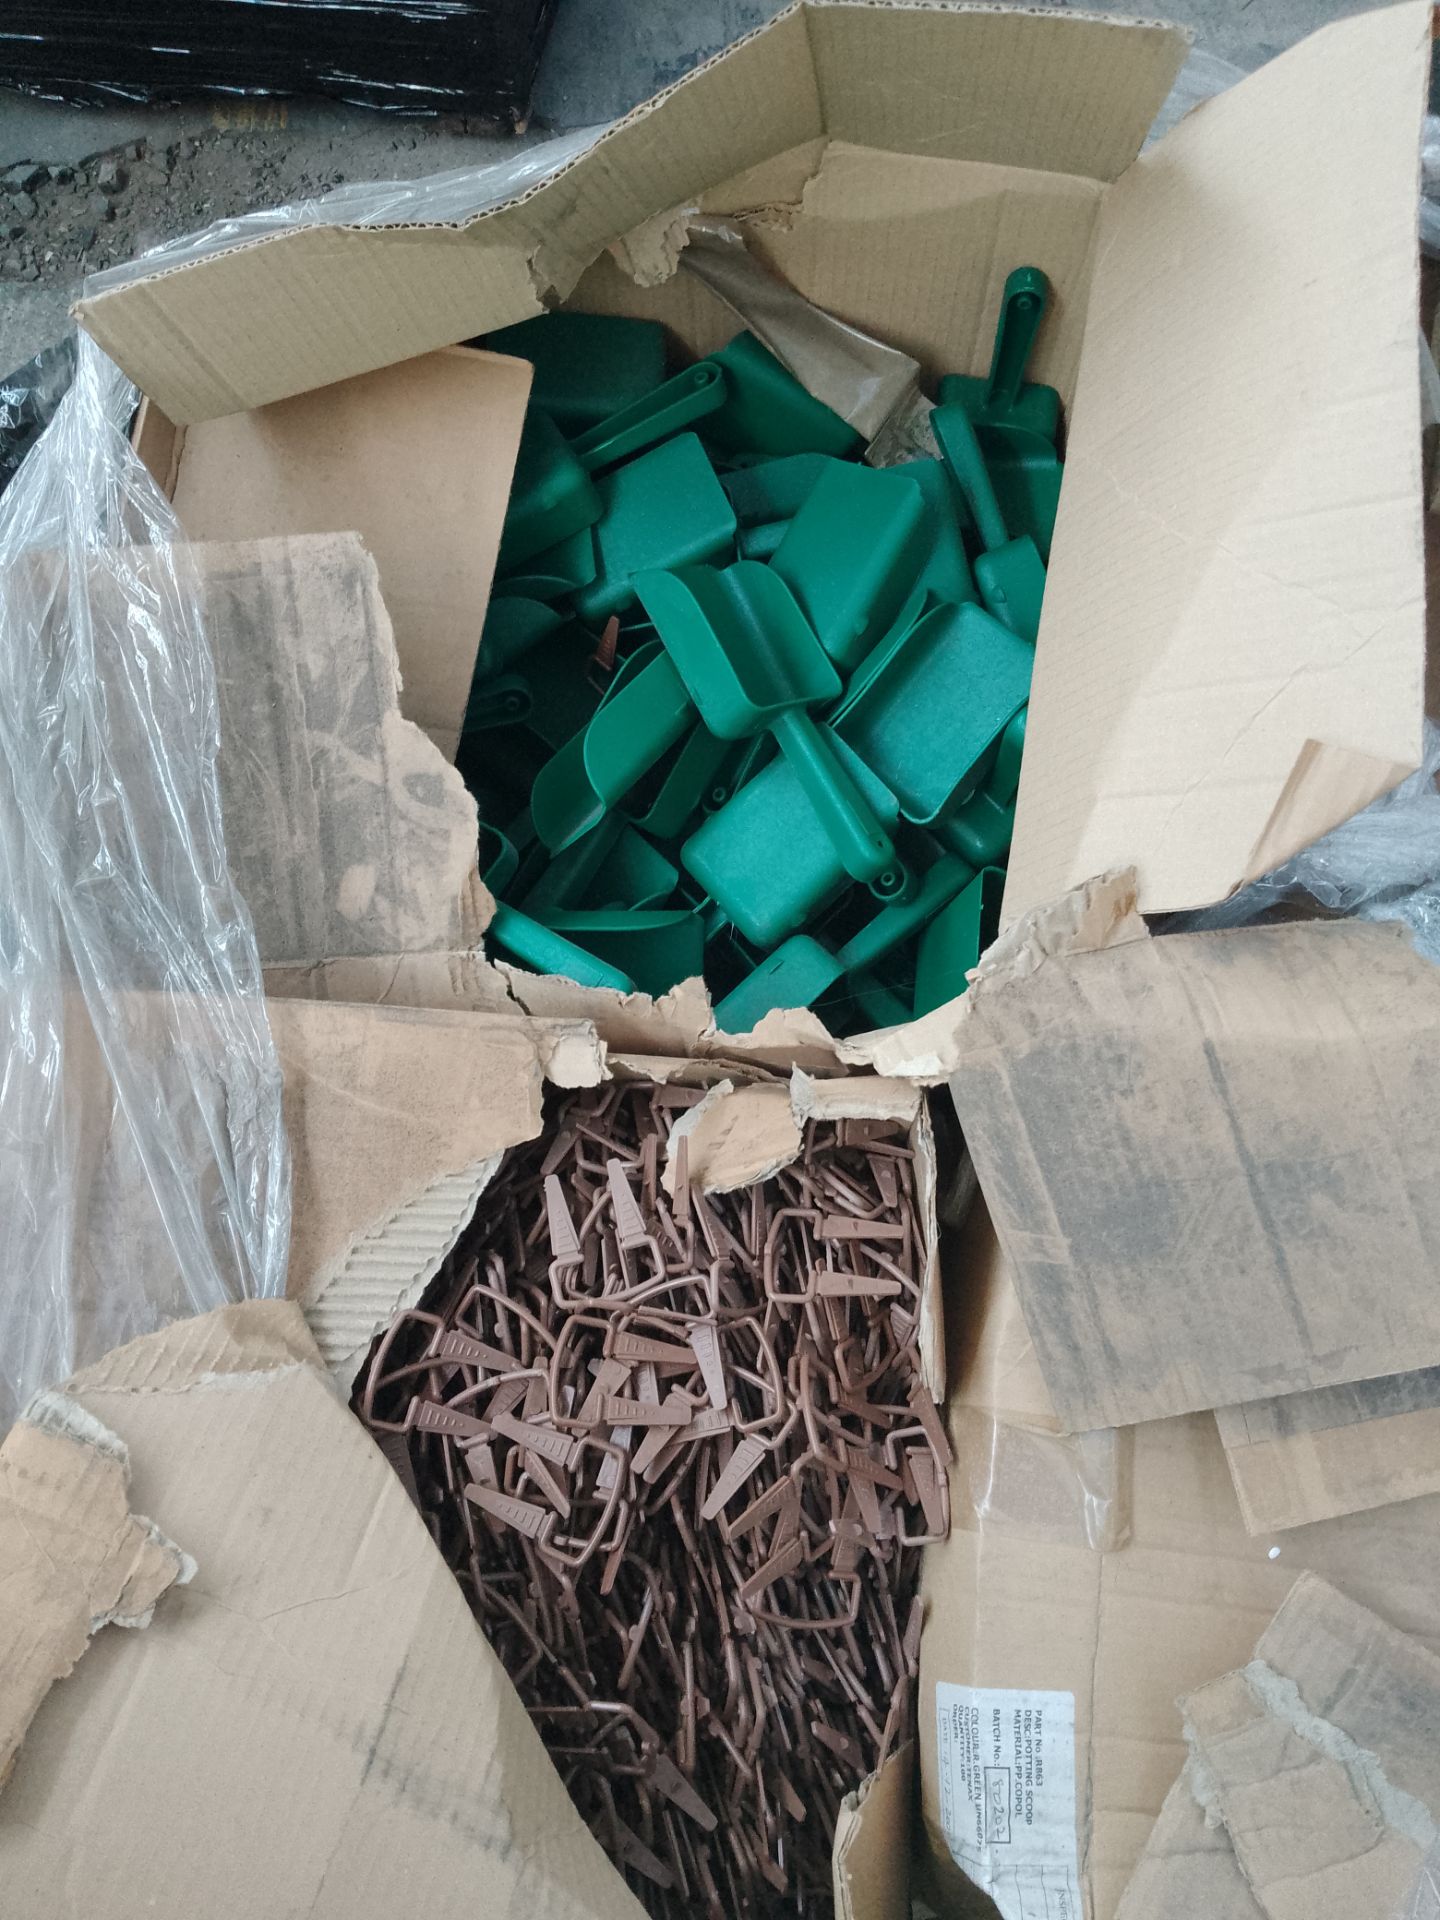 1 Pallet Full of Small Plastic Spades & Thousands of Plastic Accessories for Plant Pots